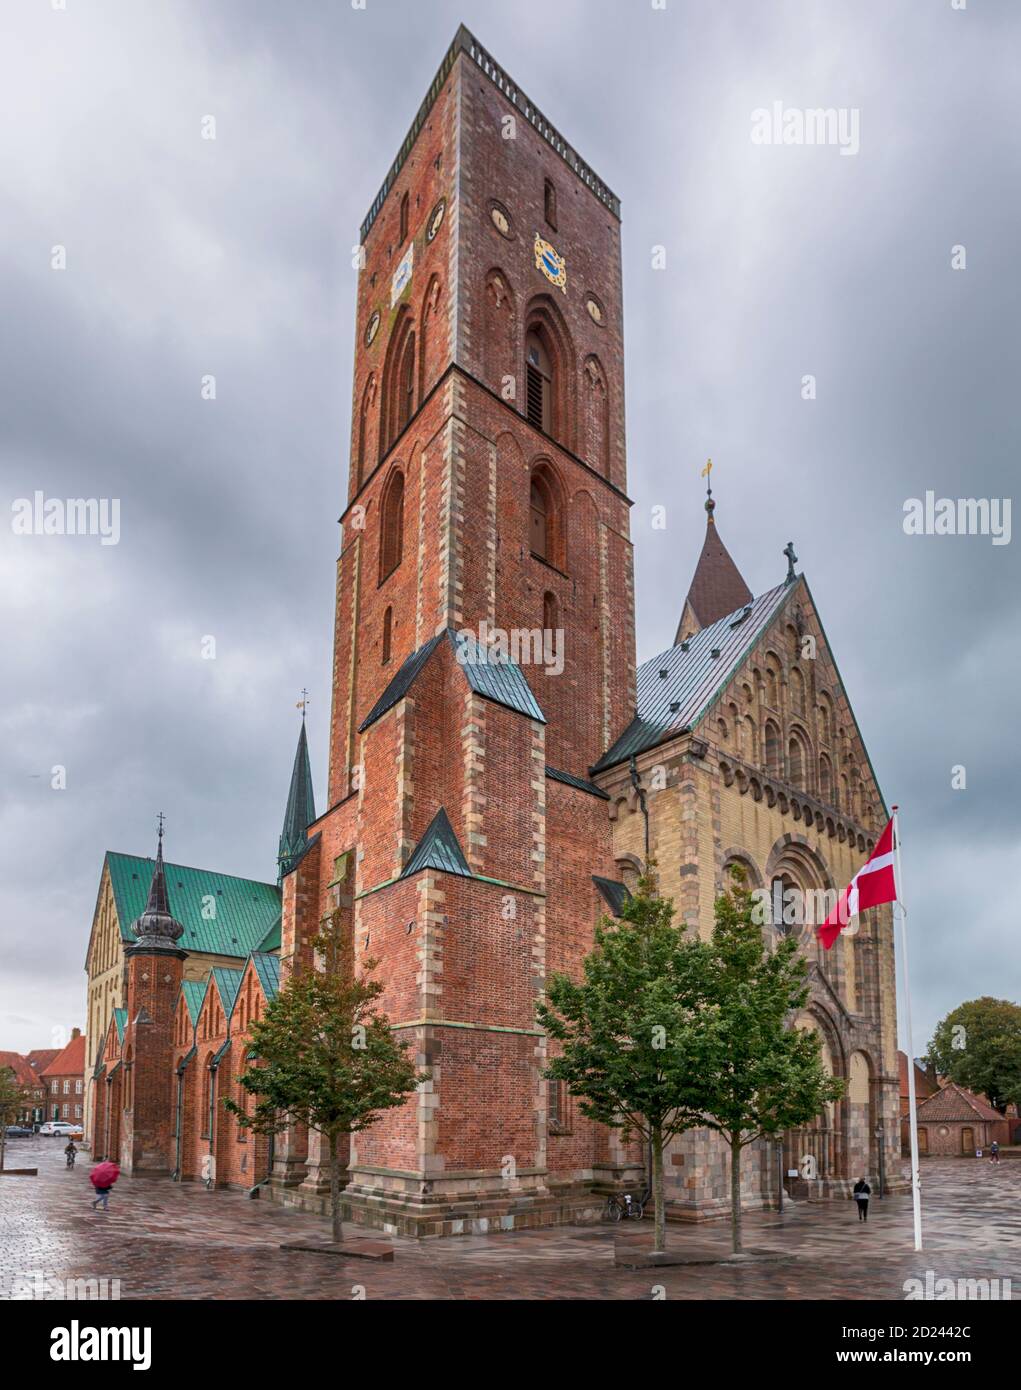 Ribe cathedral, 12th century church at Denmark’s oldest town Stock Photo